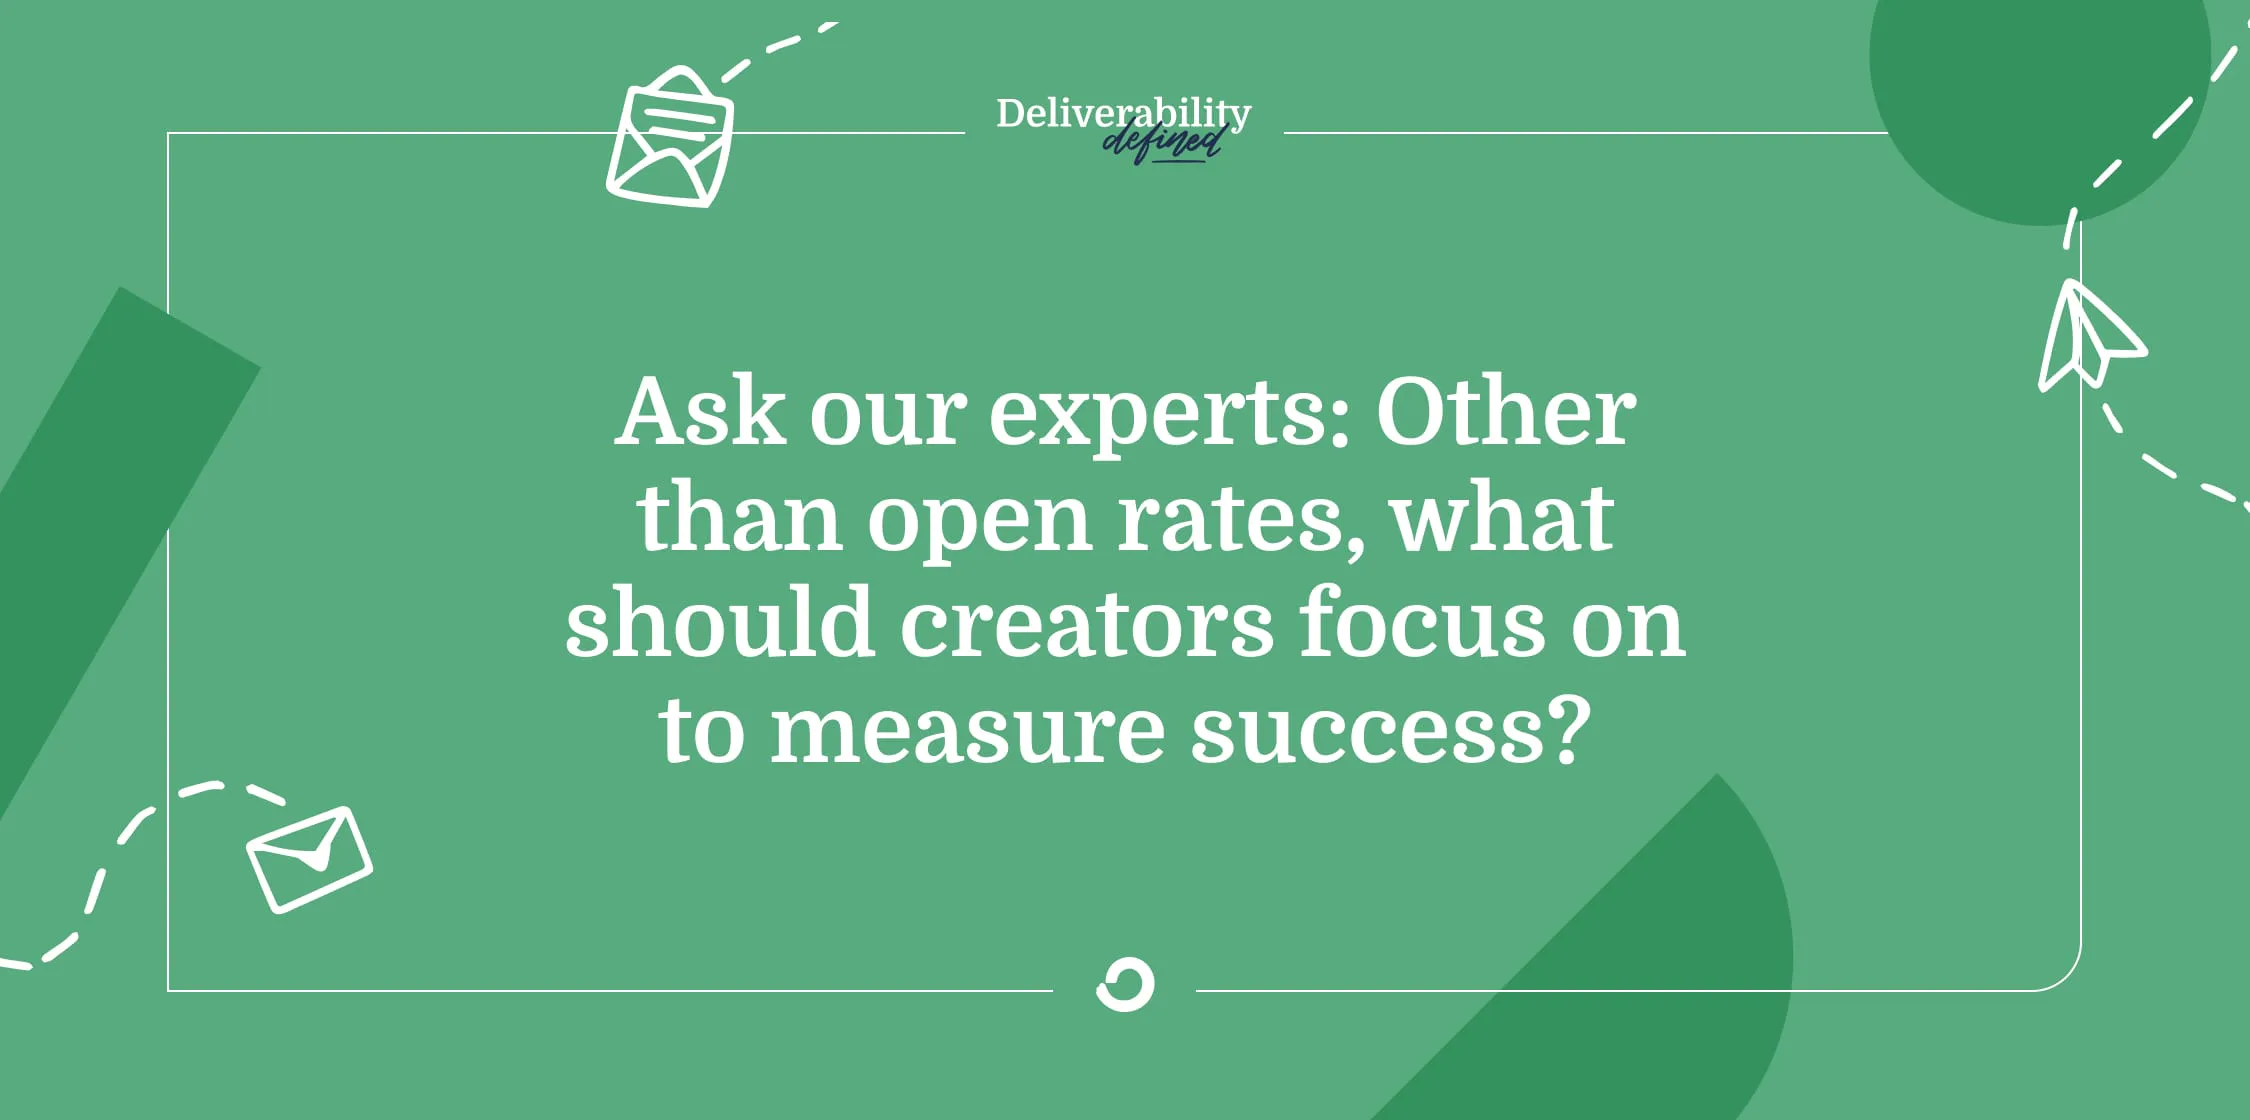 Ask our experts: Other than open rates, what should creators focus on to measure success?